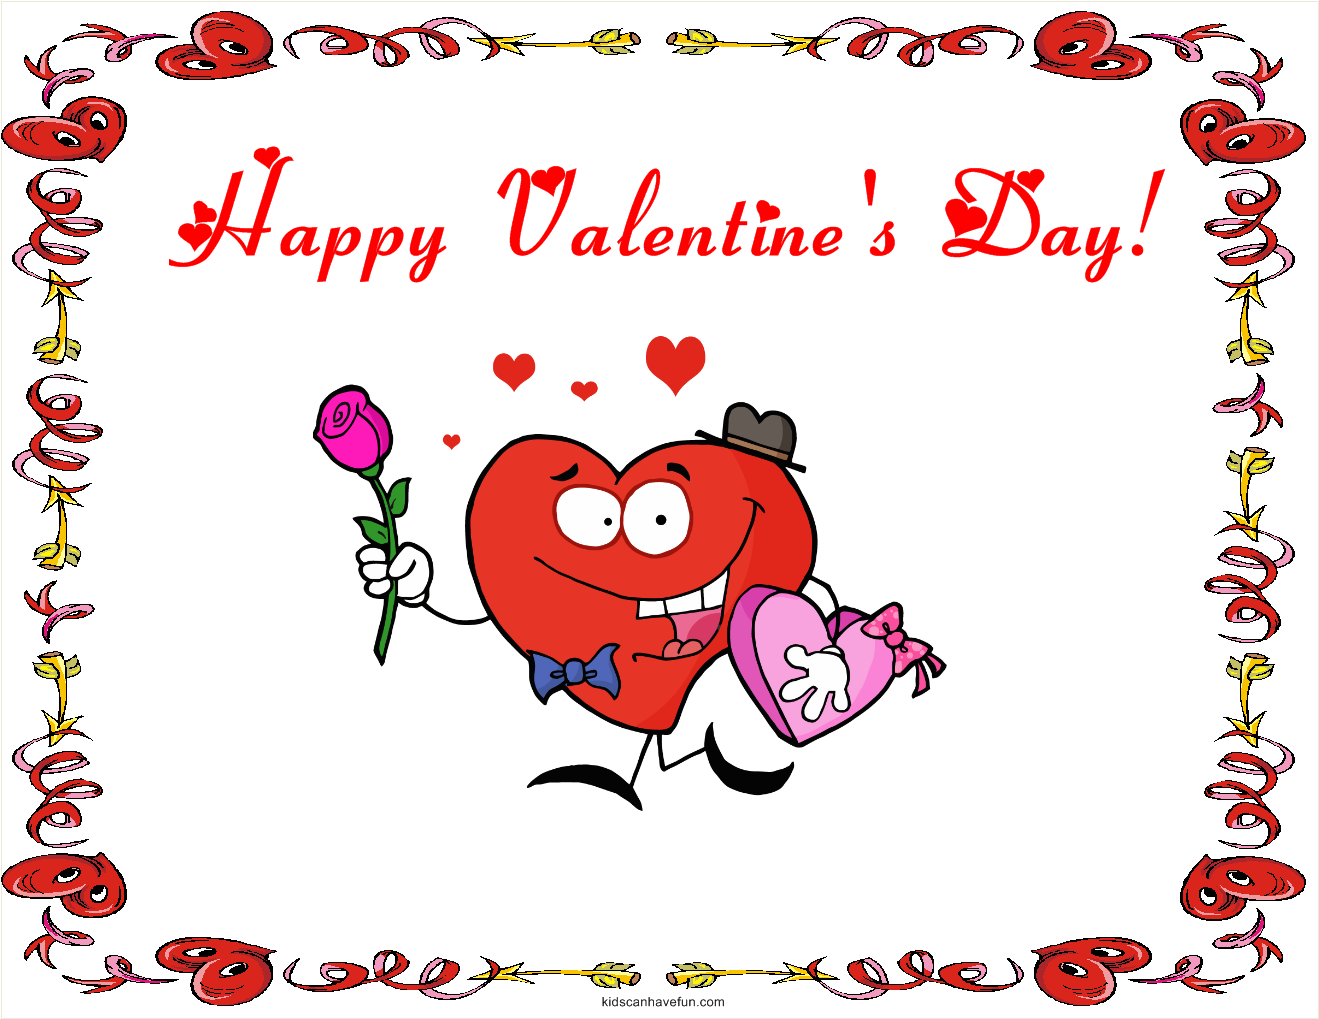 Happy Valentines Day Picture - Funny Valentines Day Cards For Kids -  1319x1019 Wallpaper 